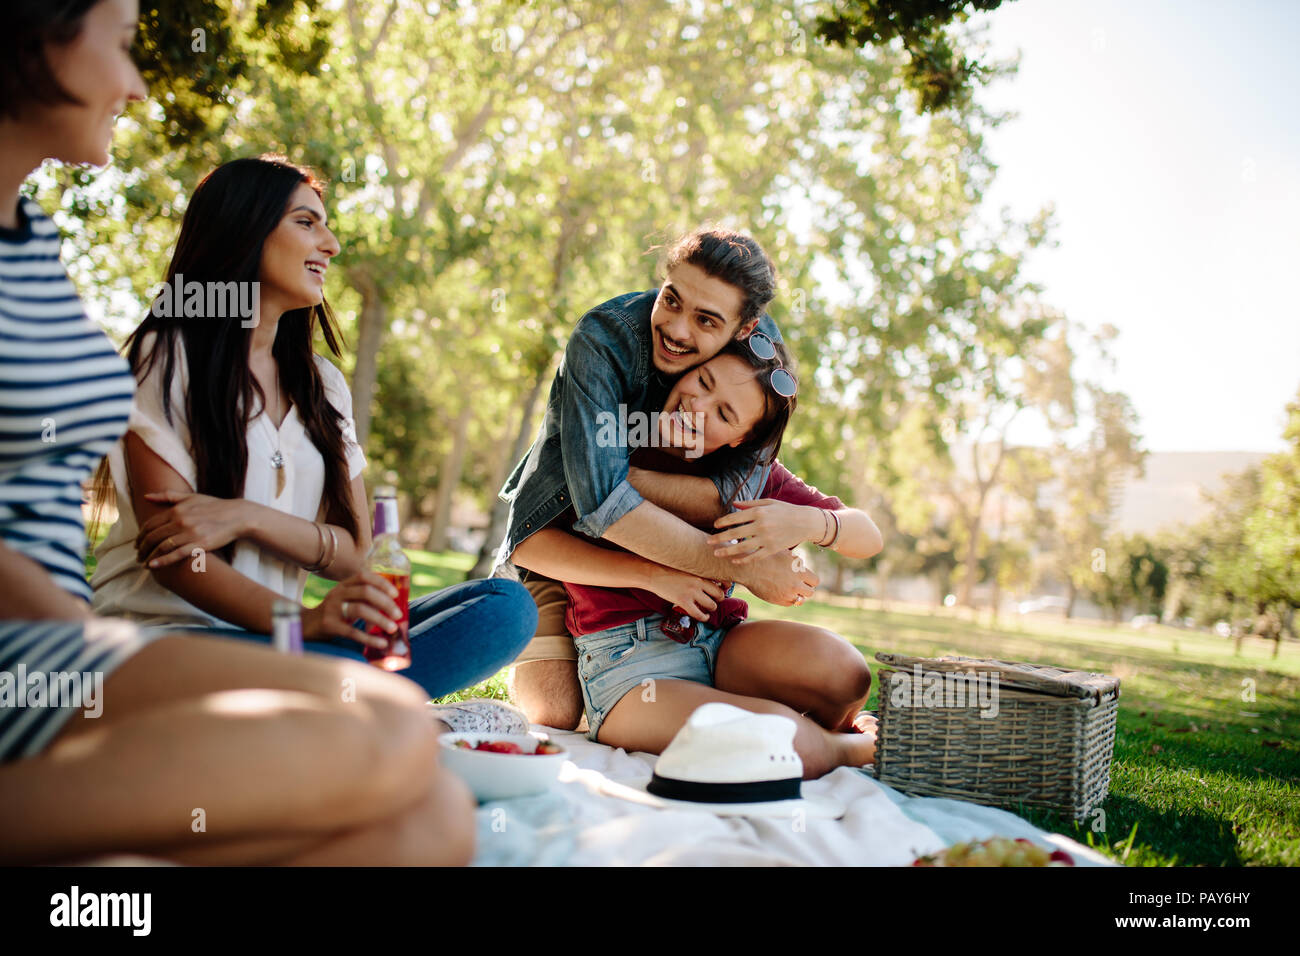 Man embracing his girlfriend while sitting with female friends at park. Happy young friends enjoying picnic. Stock Photo